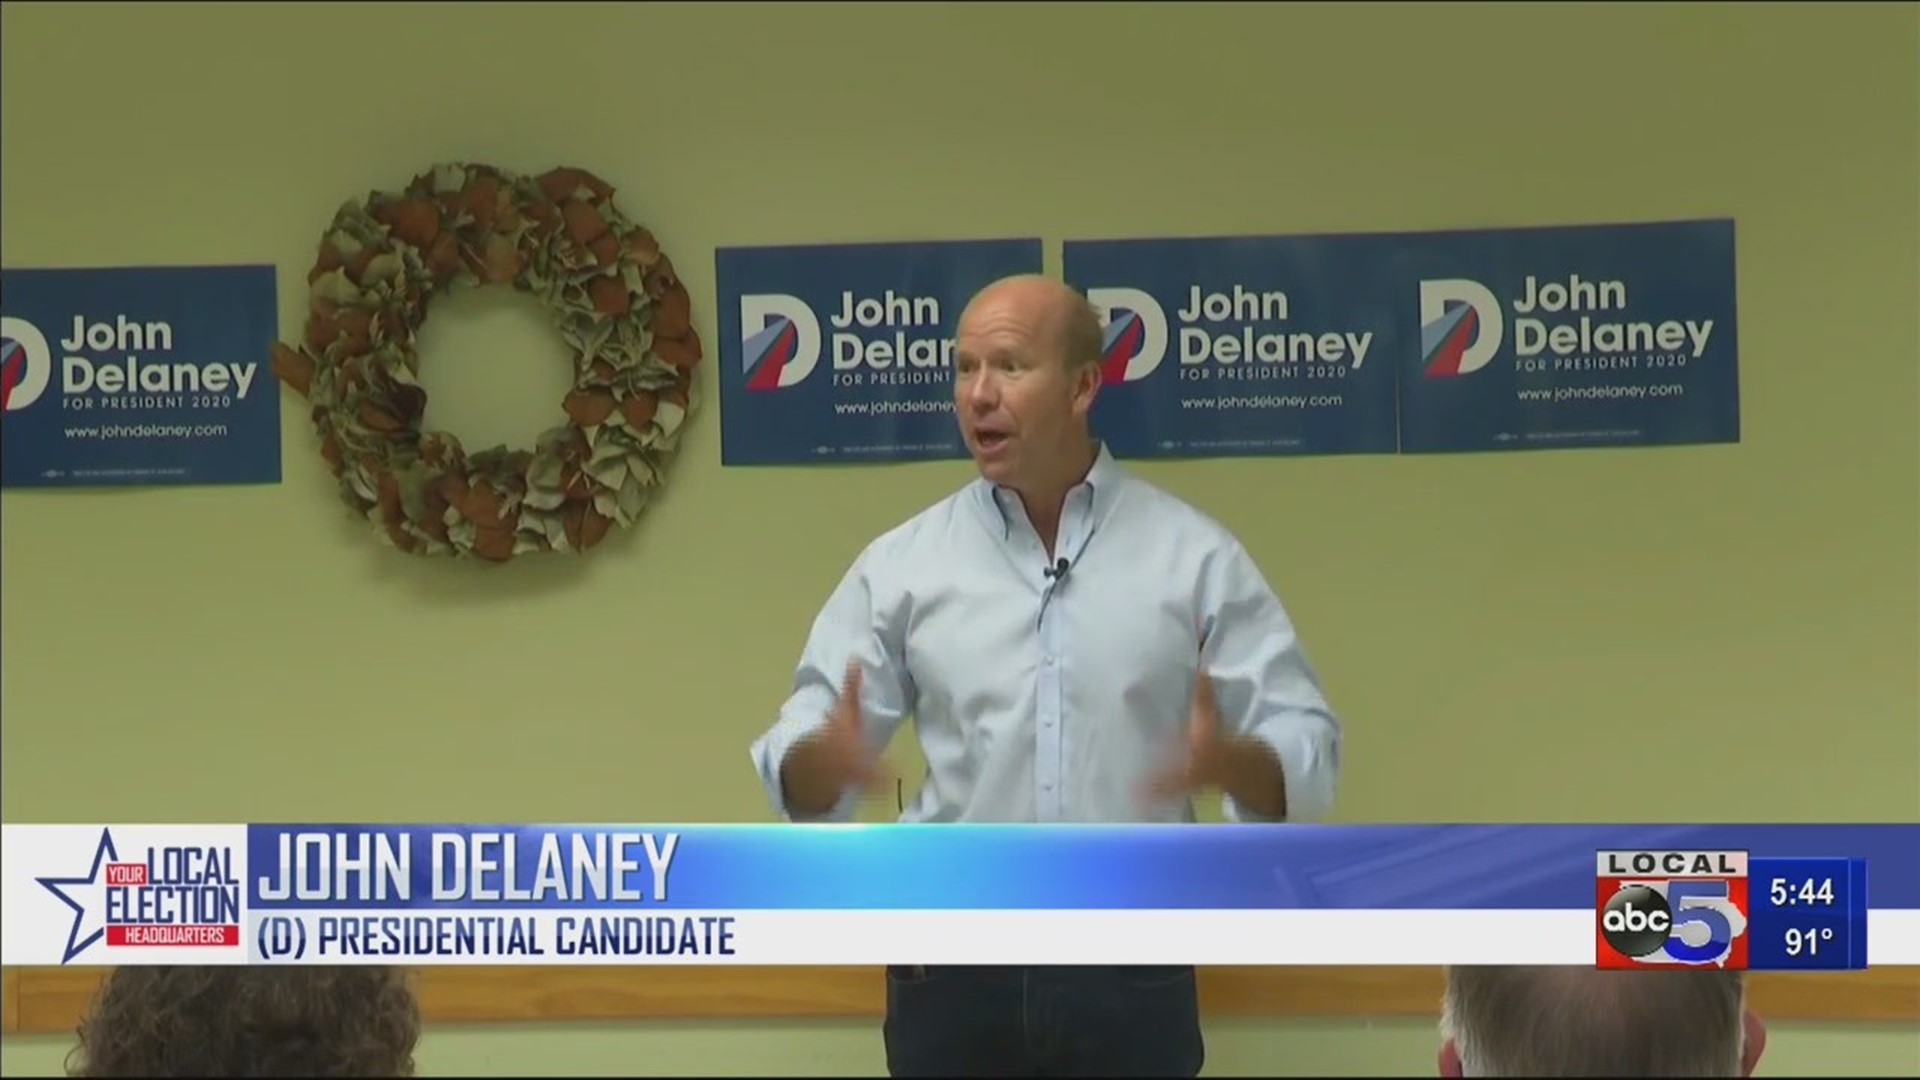 Democratic Presidential candidate John Delaney visited Iowa for a series of visits to towns. He held meet and greets where he signed copies of his book.